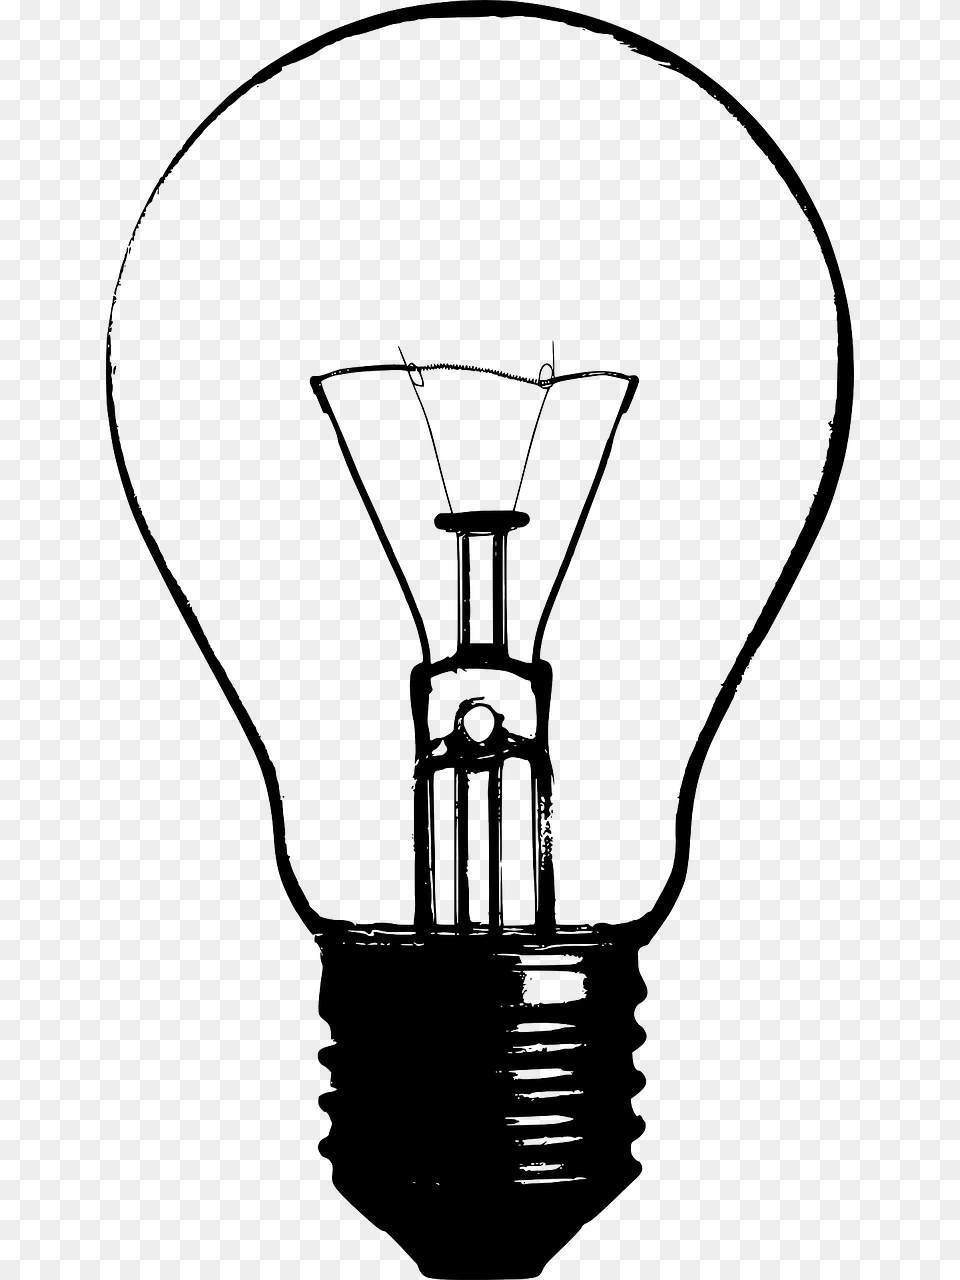 Result For Lightbulb Stencil Light Bulb Drawing Vintage Light Bulb Clip Art, Accessories, Jewelry, Necklace Png Image